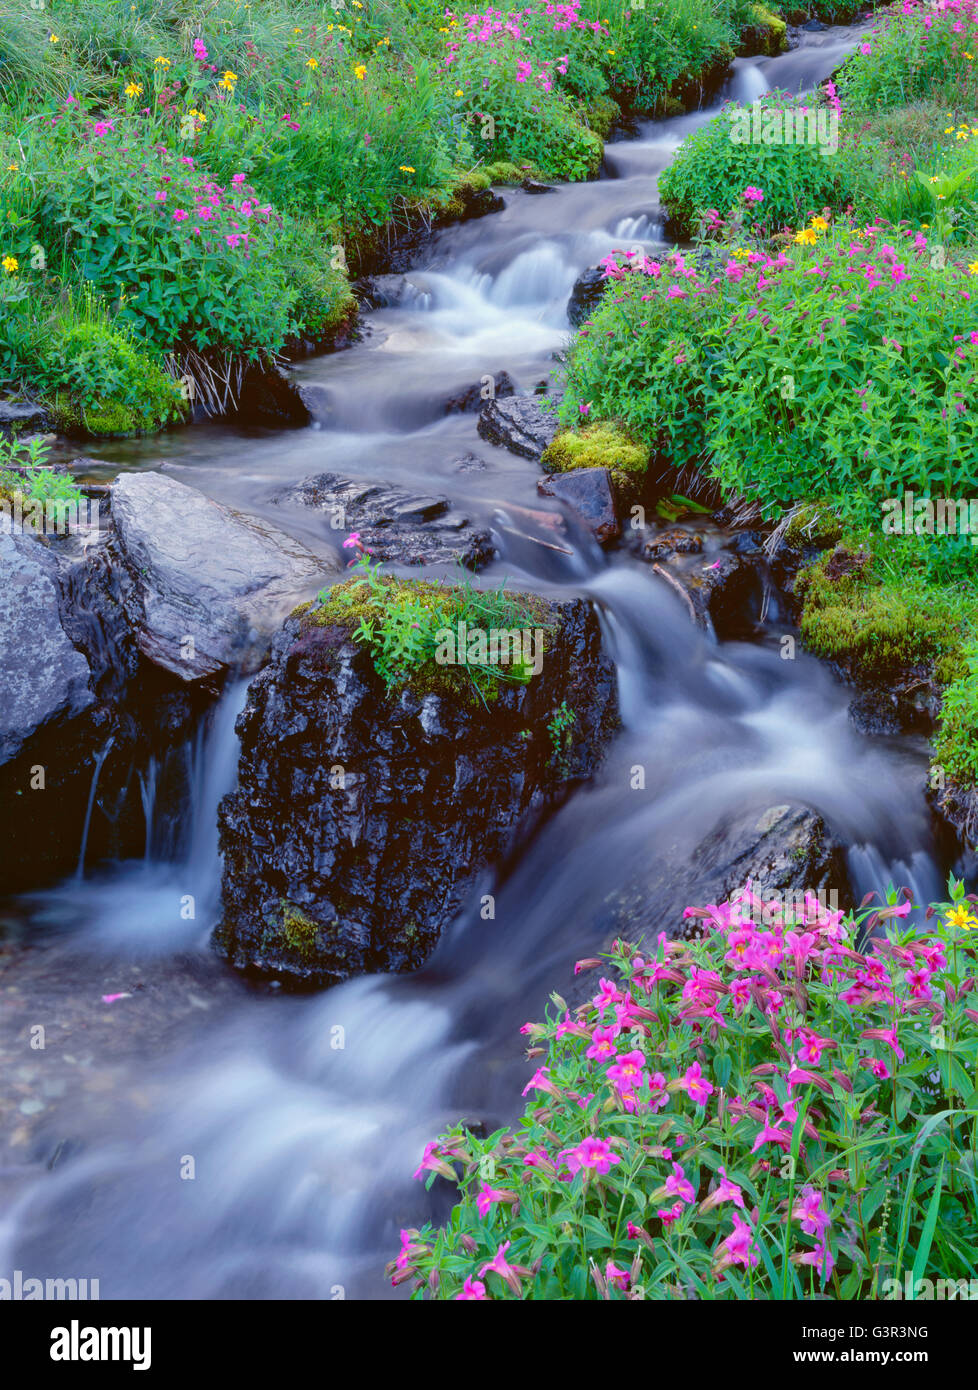 USA, Montana, Glacier National Park, Pink blossoms of Lewis monkeyflower and yellow blossoms of arnica bloom along Lunch Creek. Stock Photo